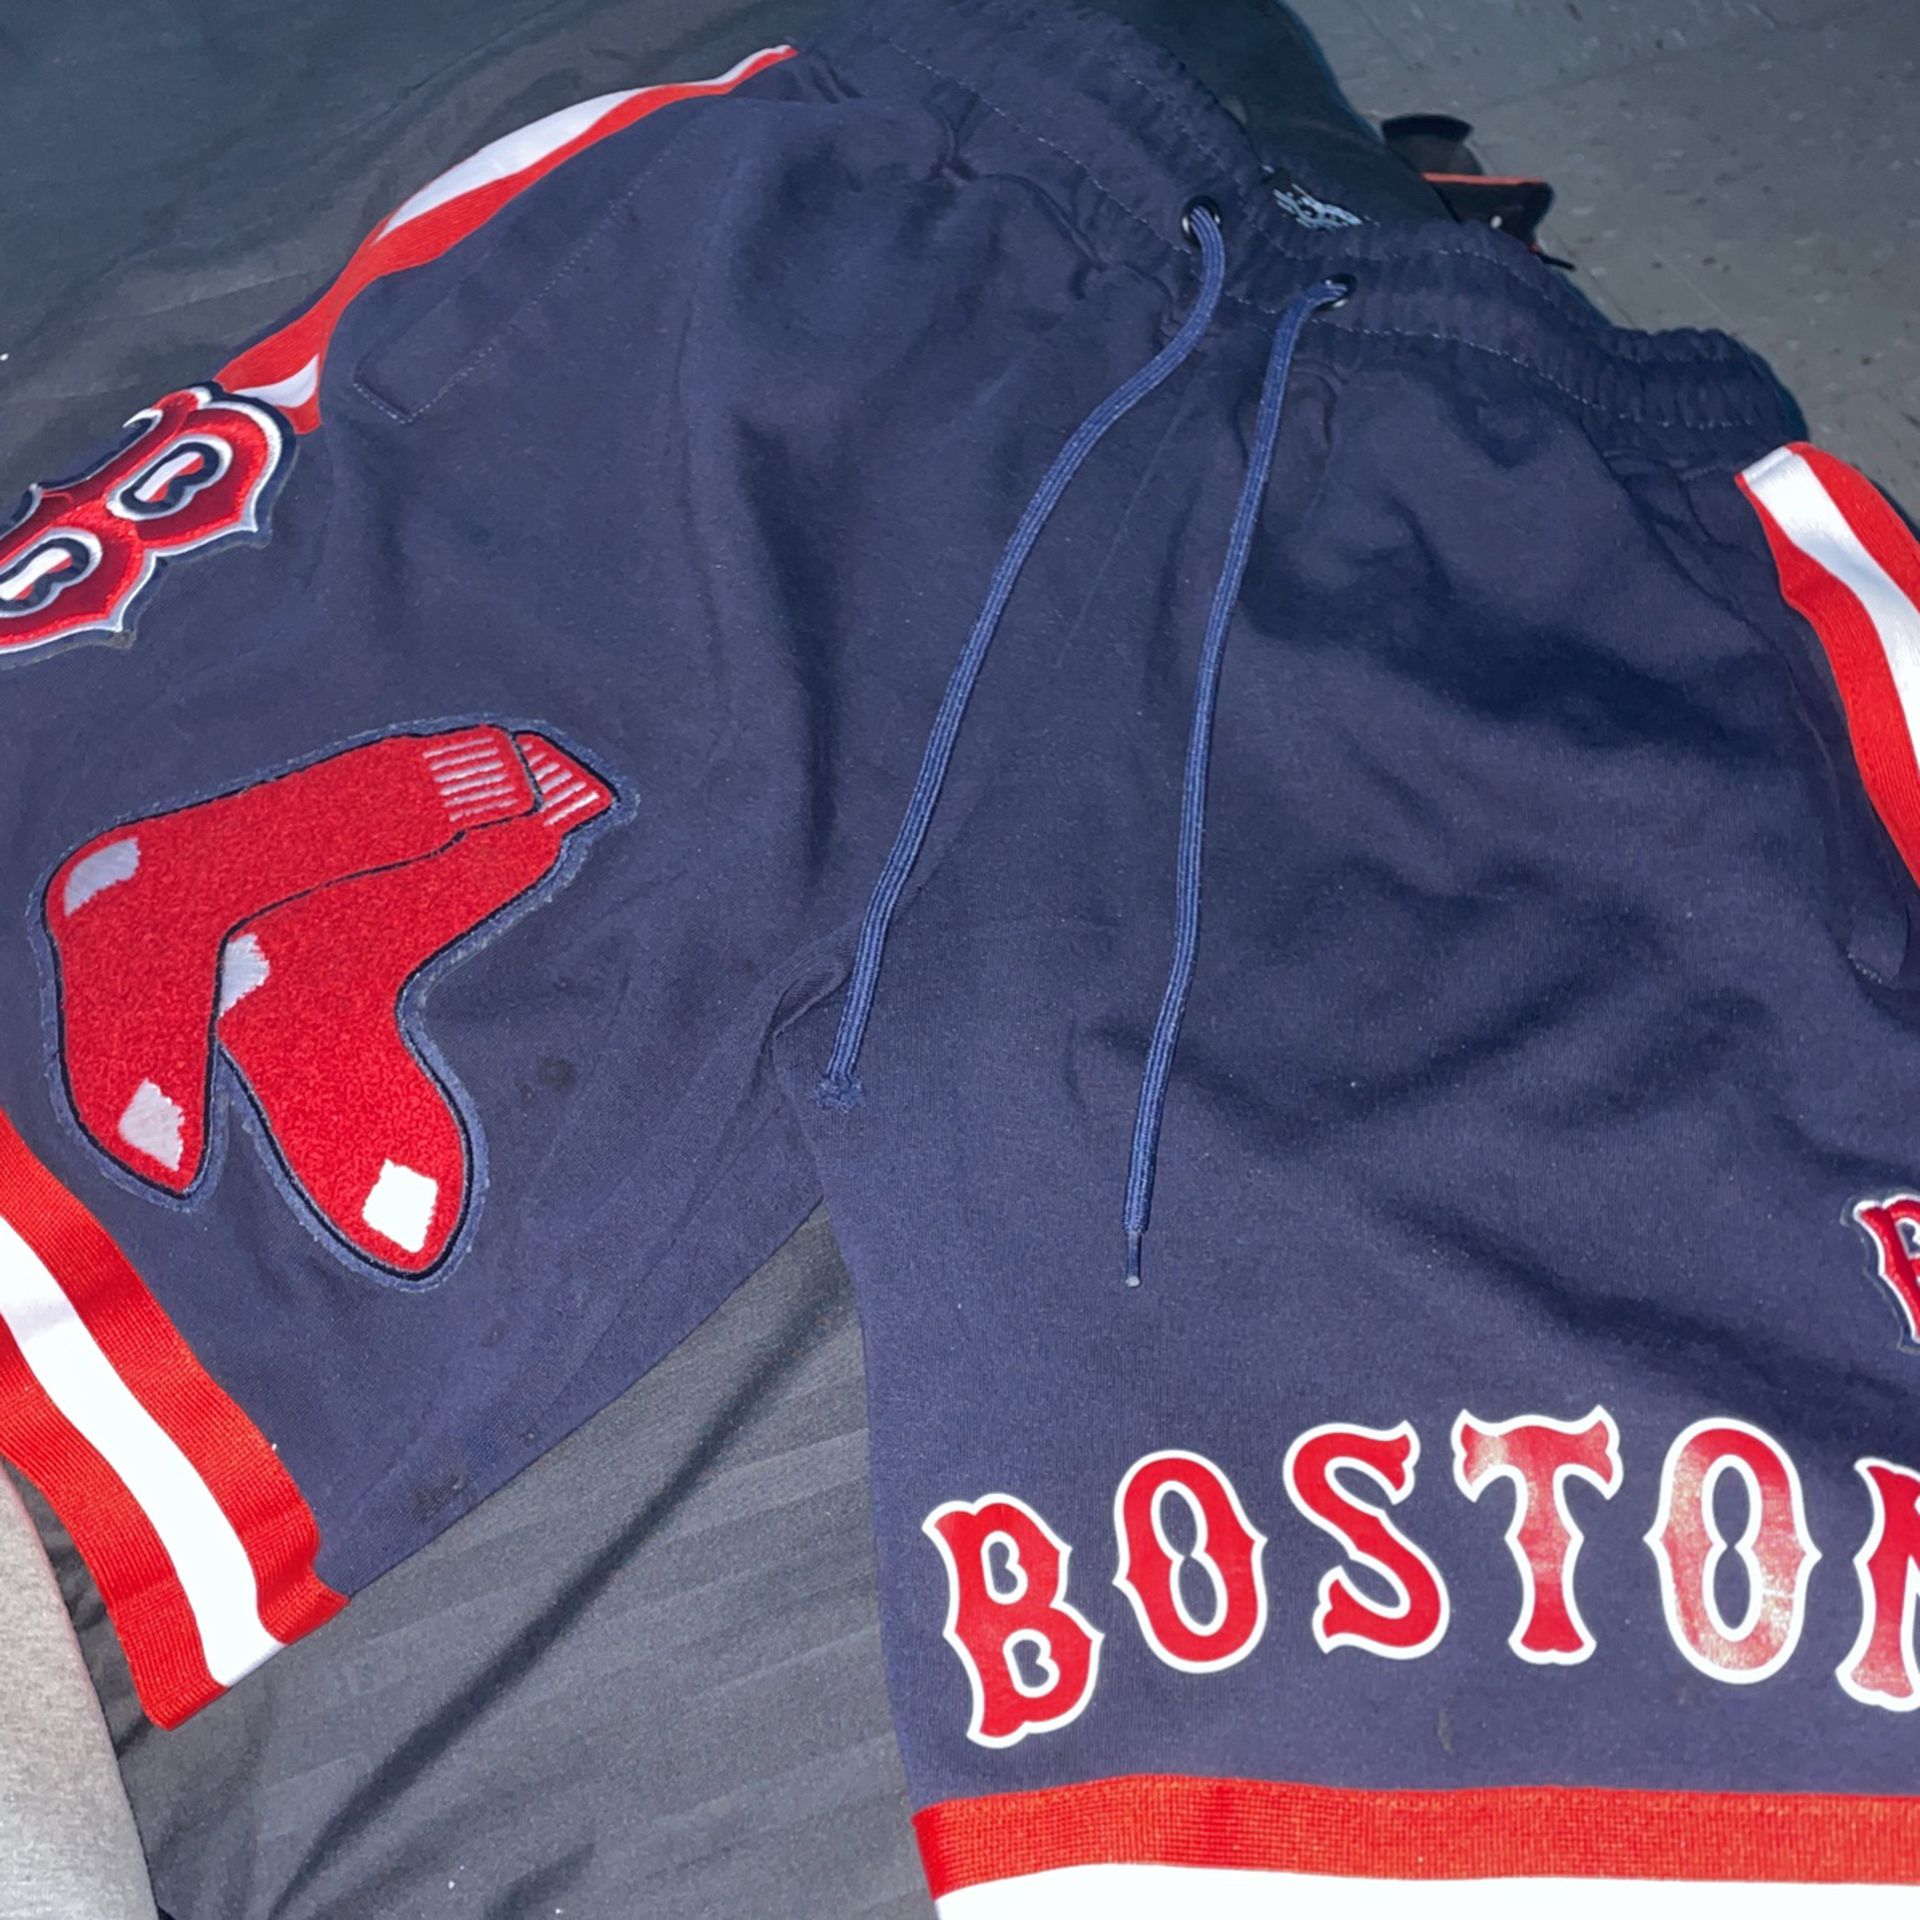 Boston Red Sox Shorts for Sale in New York, NY - OfferUp